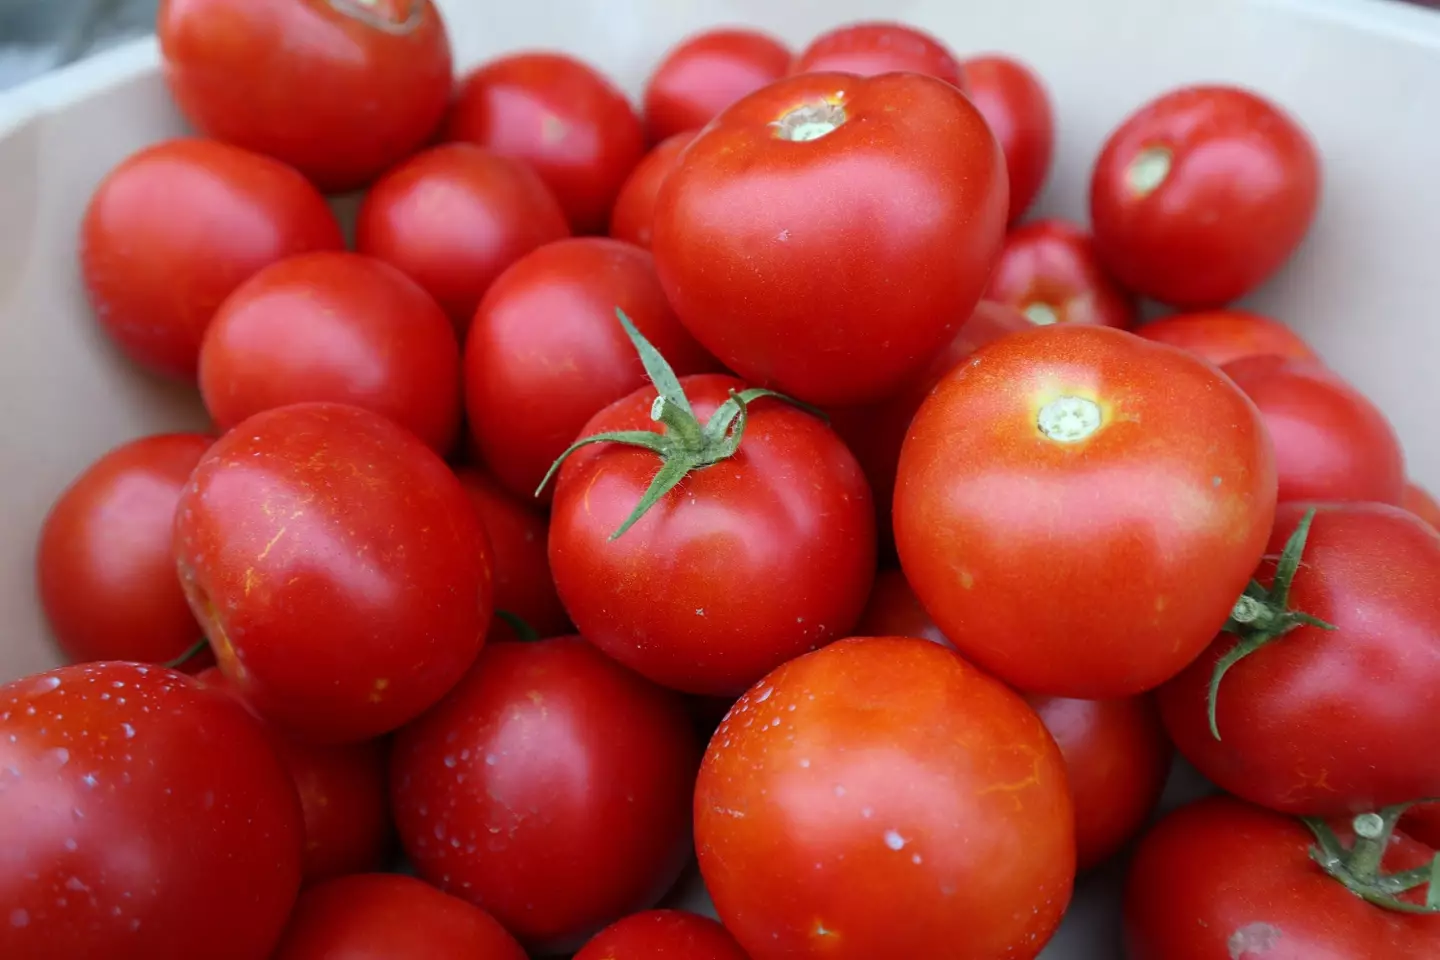 Tomatoes may also be the culprit (